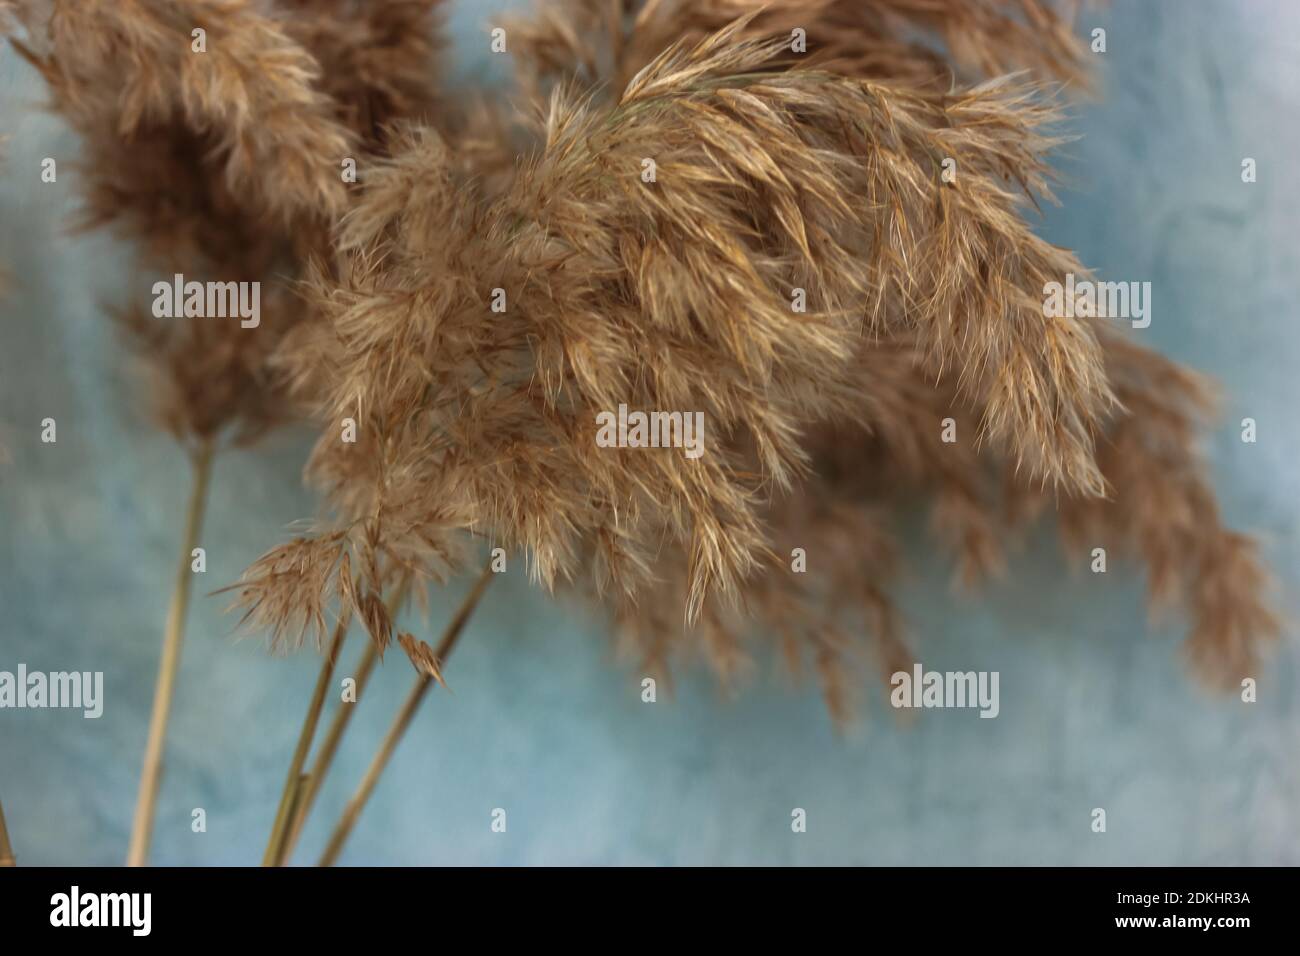 Pampas grass or cortaderia dioecious, Sello against a blue wall in the interior Stock Photo